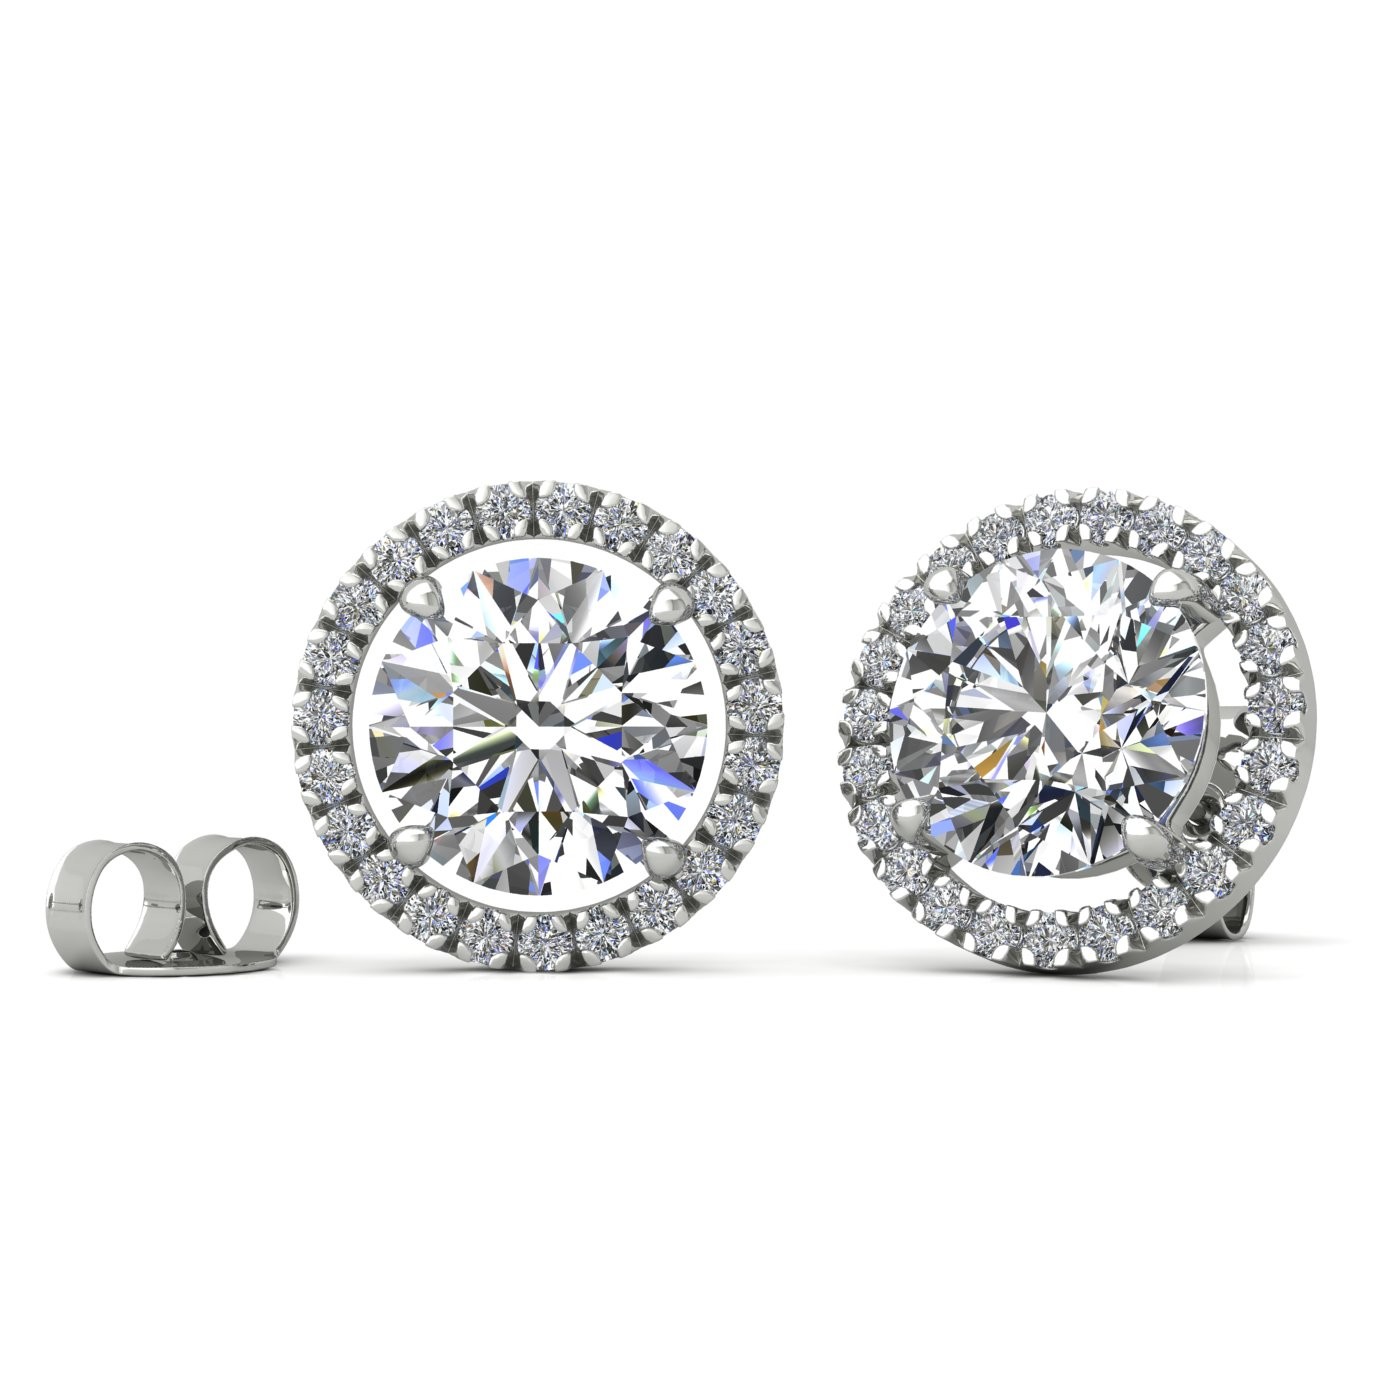 18k white gold  0,7 ct each (1,4 tcw) 4 prongs round brilliant cut halo diamond earring studs Photos & images